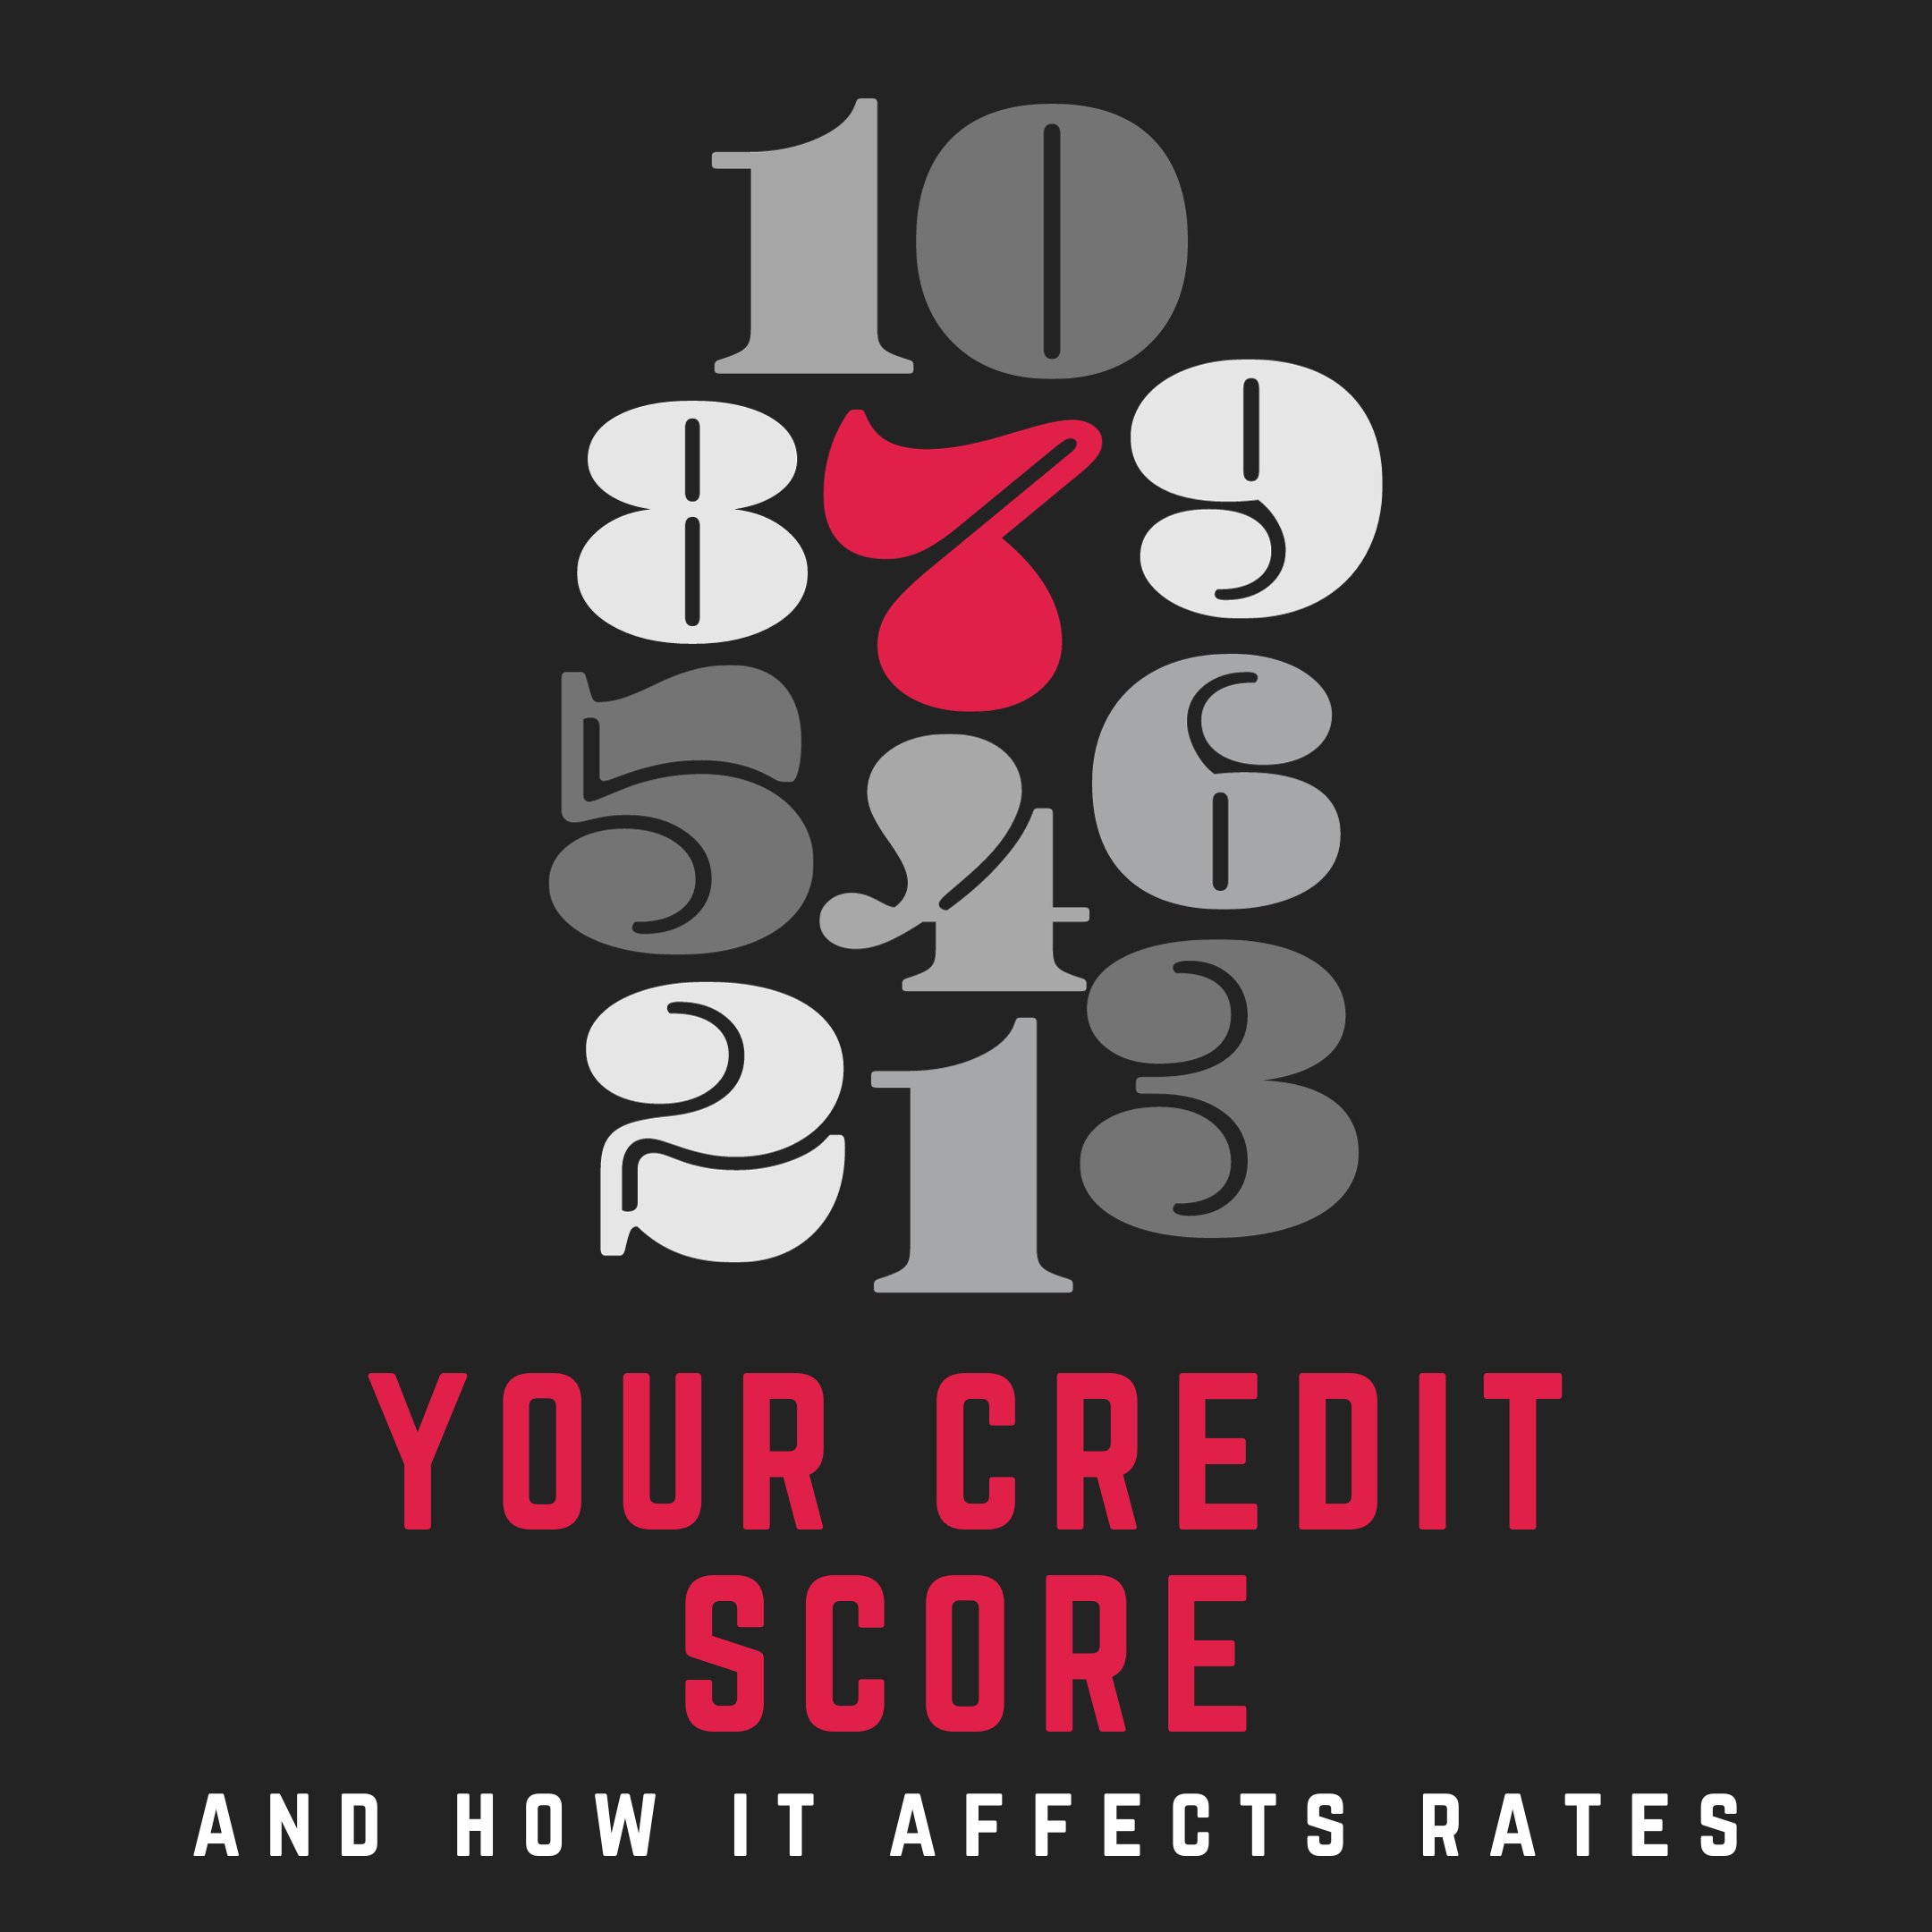 Your Credit Score - It Can Affect Your Rates